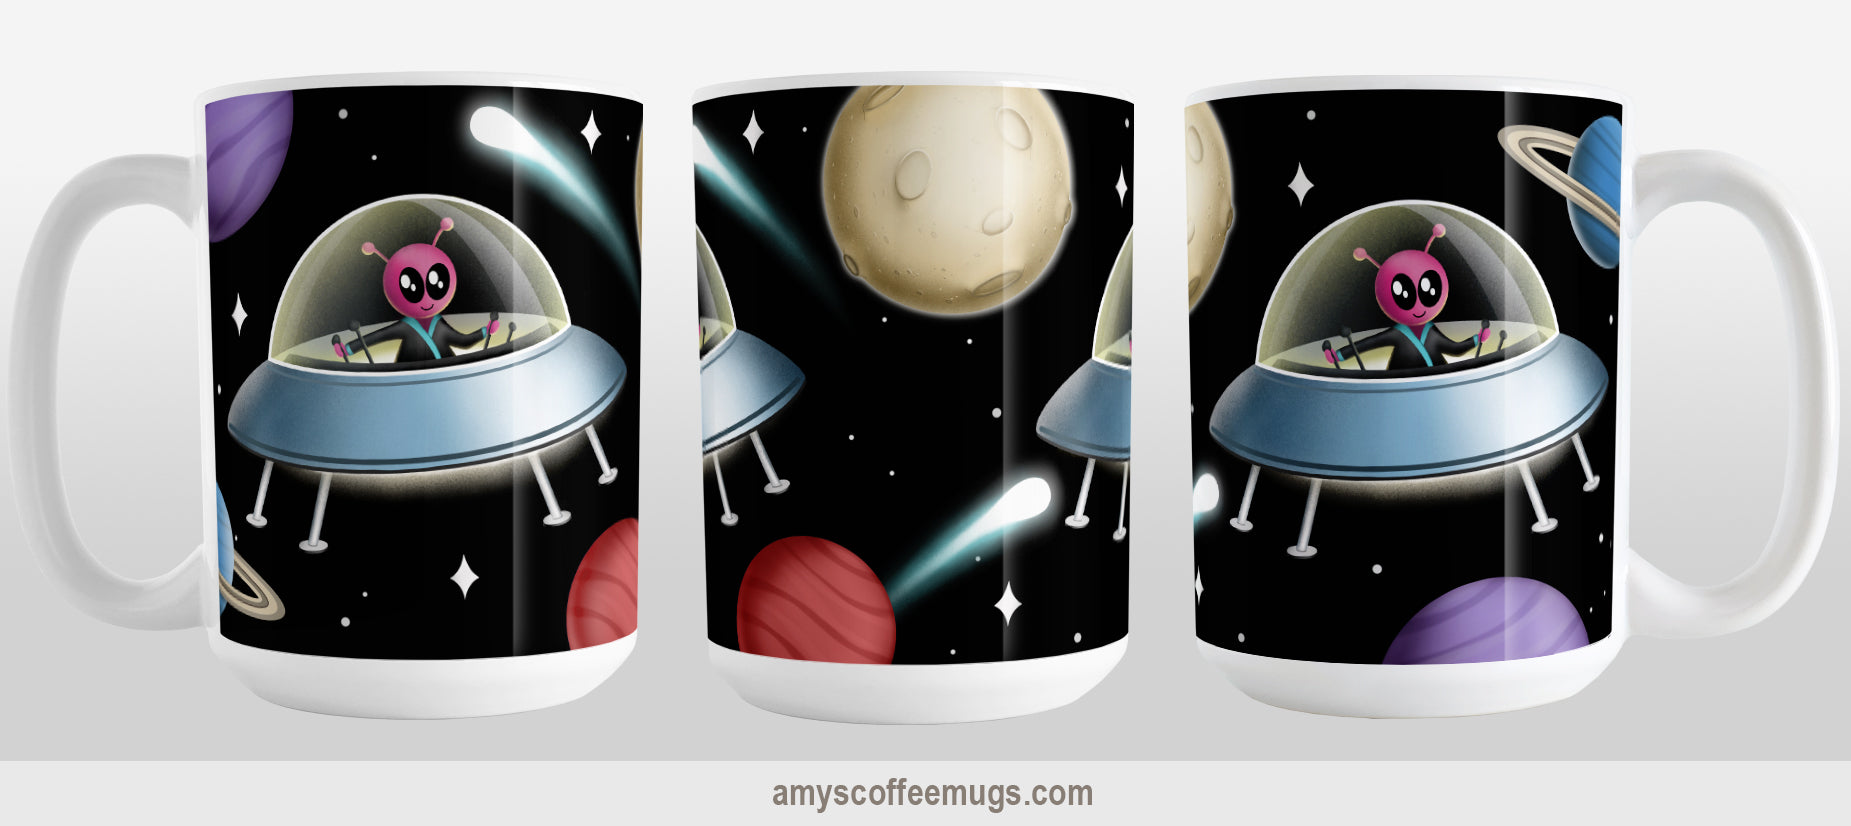 Galaxy Pink Alien Spaceship Mug (15oz) at Amy's Coffee Mugs. A galaxy spaceship mug designed with an illustration of a pink alien in a spaceship in a galaxy design with planets, stars, comets, and a moon over a black background. Photo shows 3 views of the mug to show the entire design.